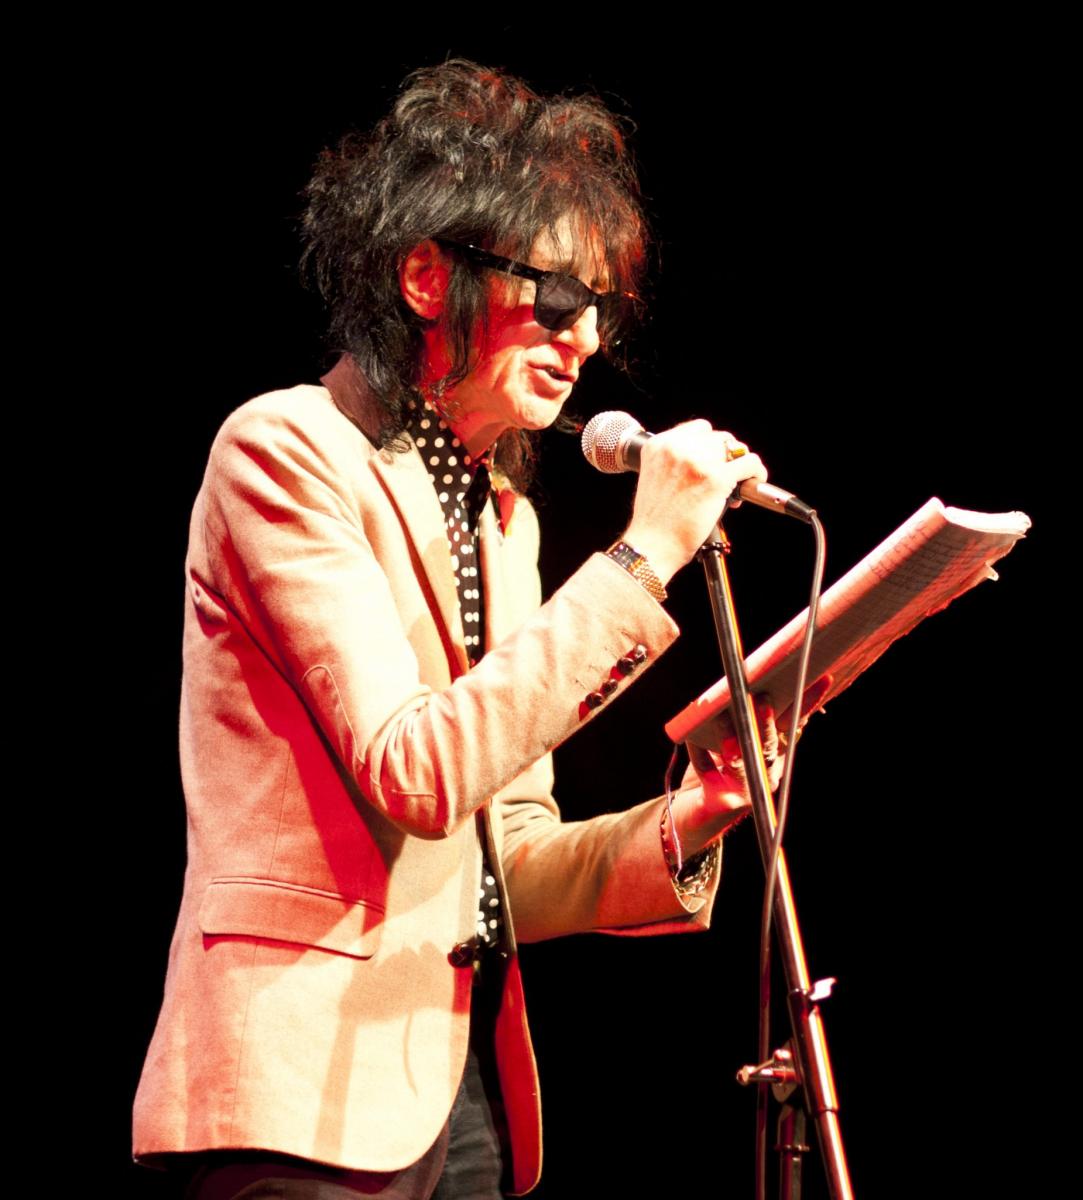 Punk poet royalty, Dr John Cooper Clarke, has announced intimate show date in Swindon